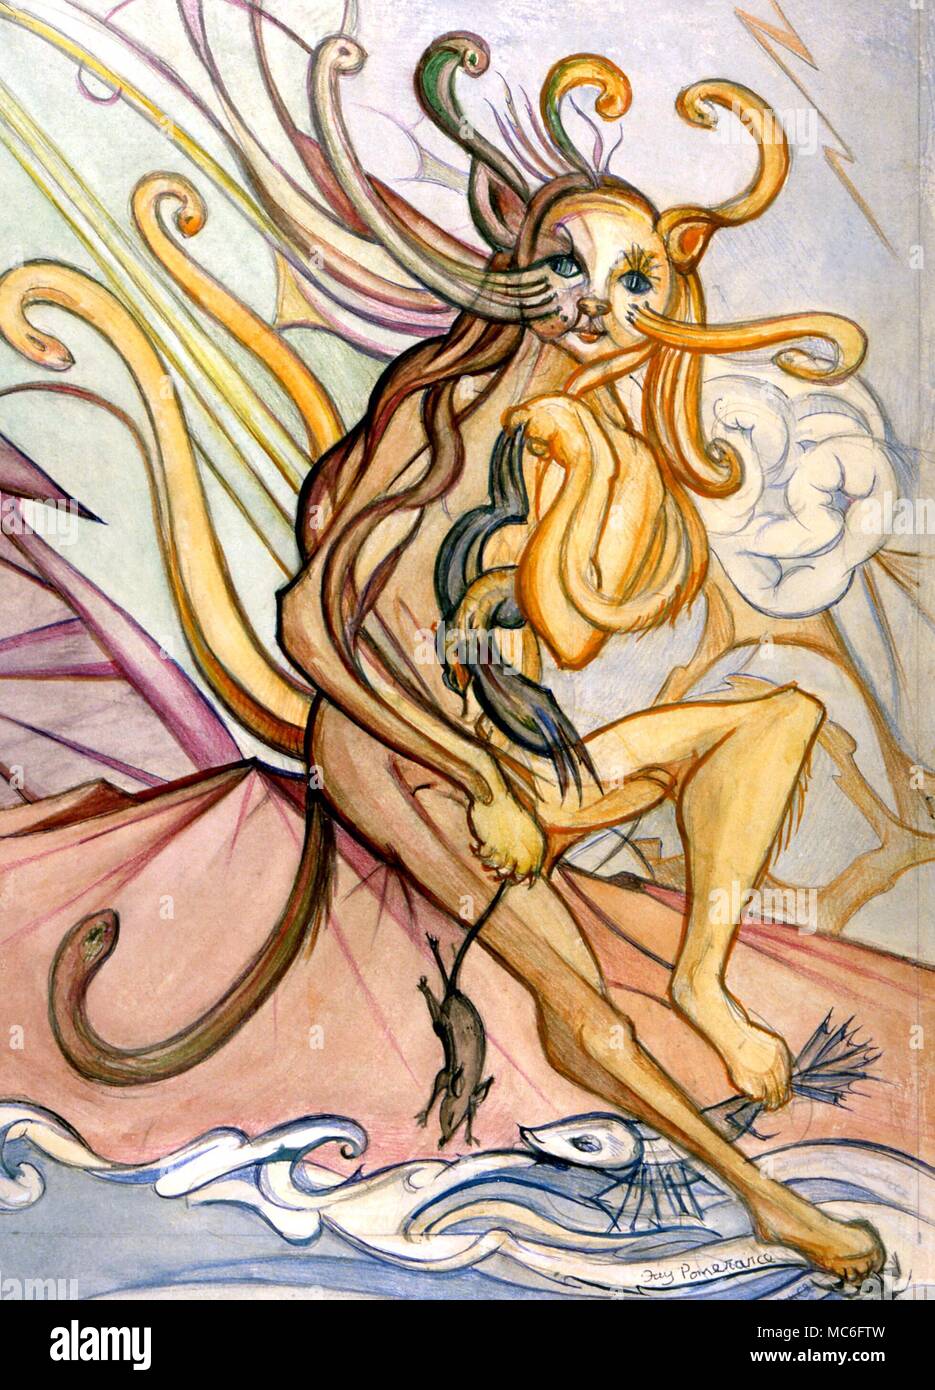 'Lilith of the Seven Tales' - painting by Fay Pomerance, 1988 - private collection Stock Photo